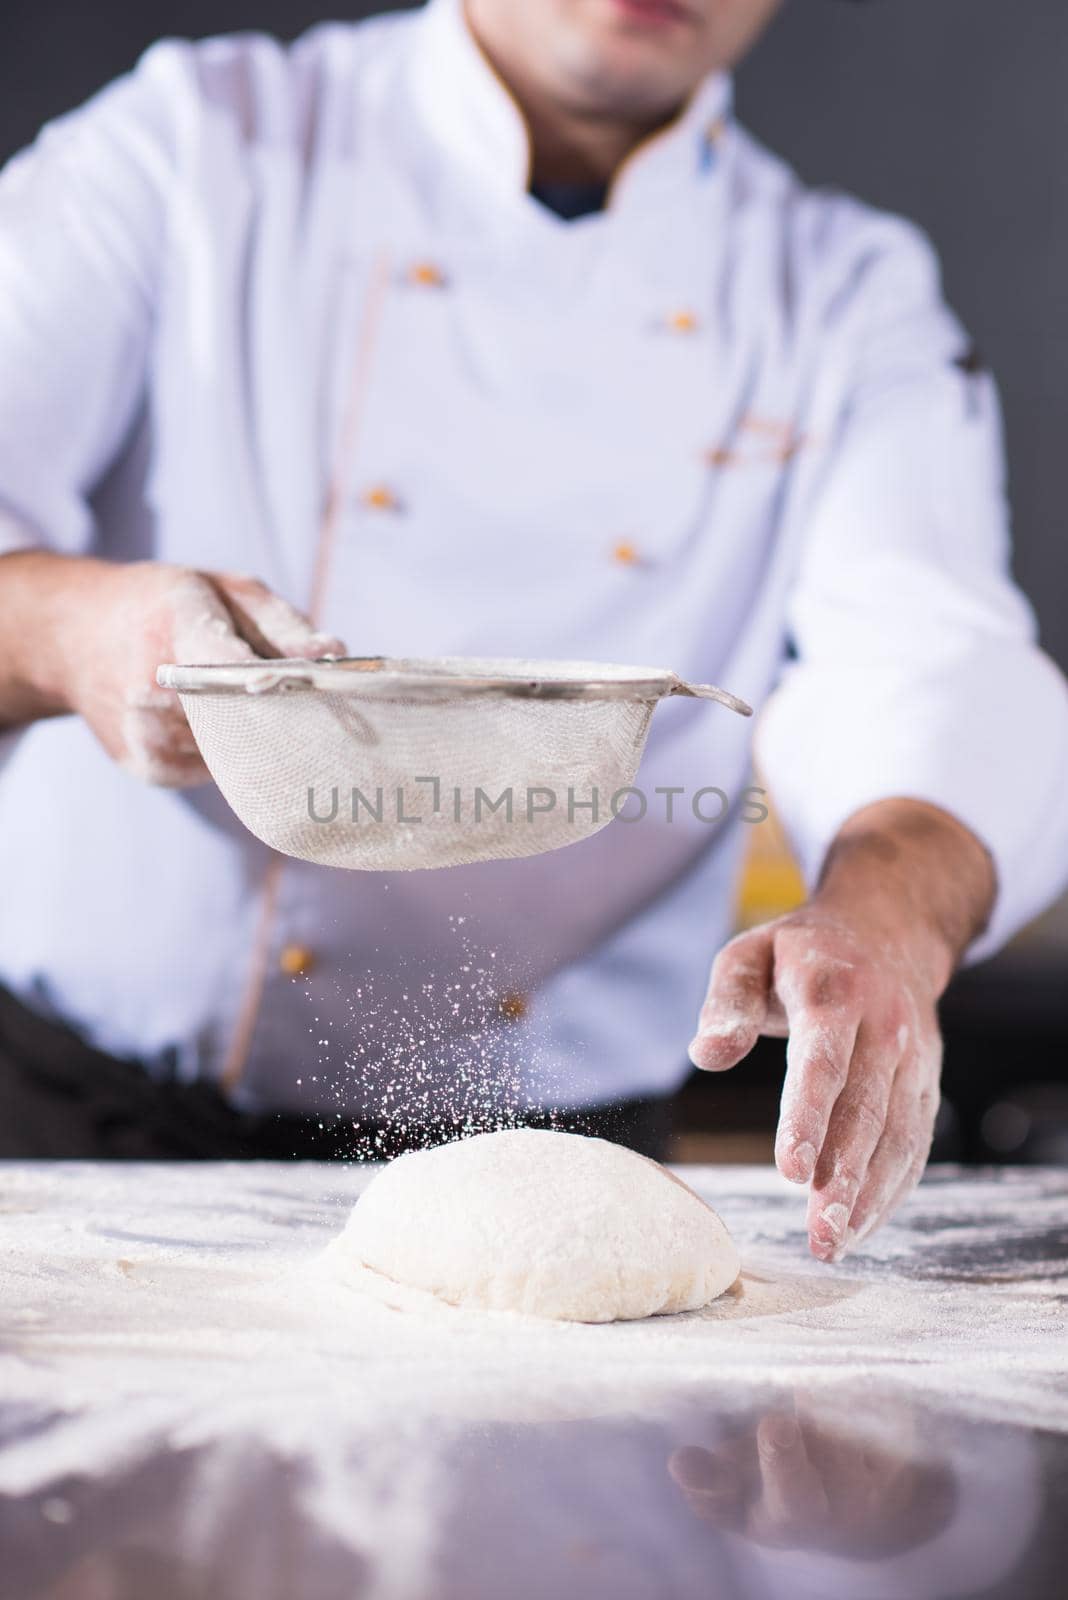 chef sprinkling flour over fresh pizza dough on kitchen table